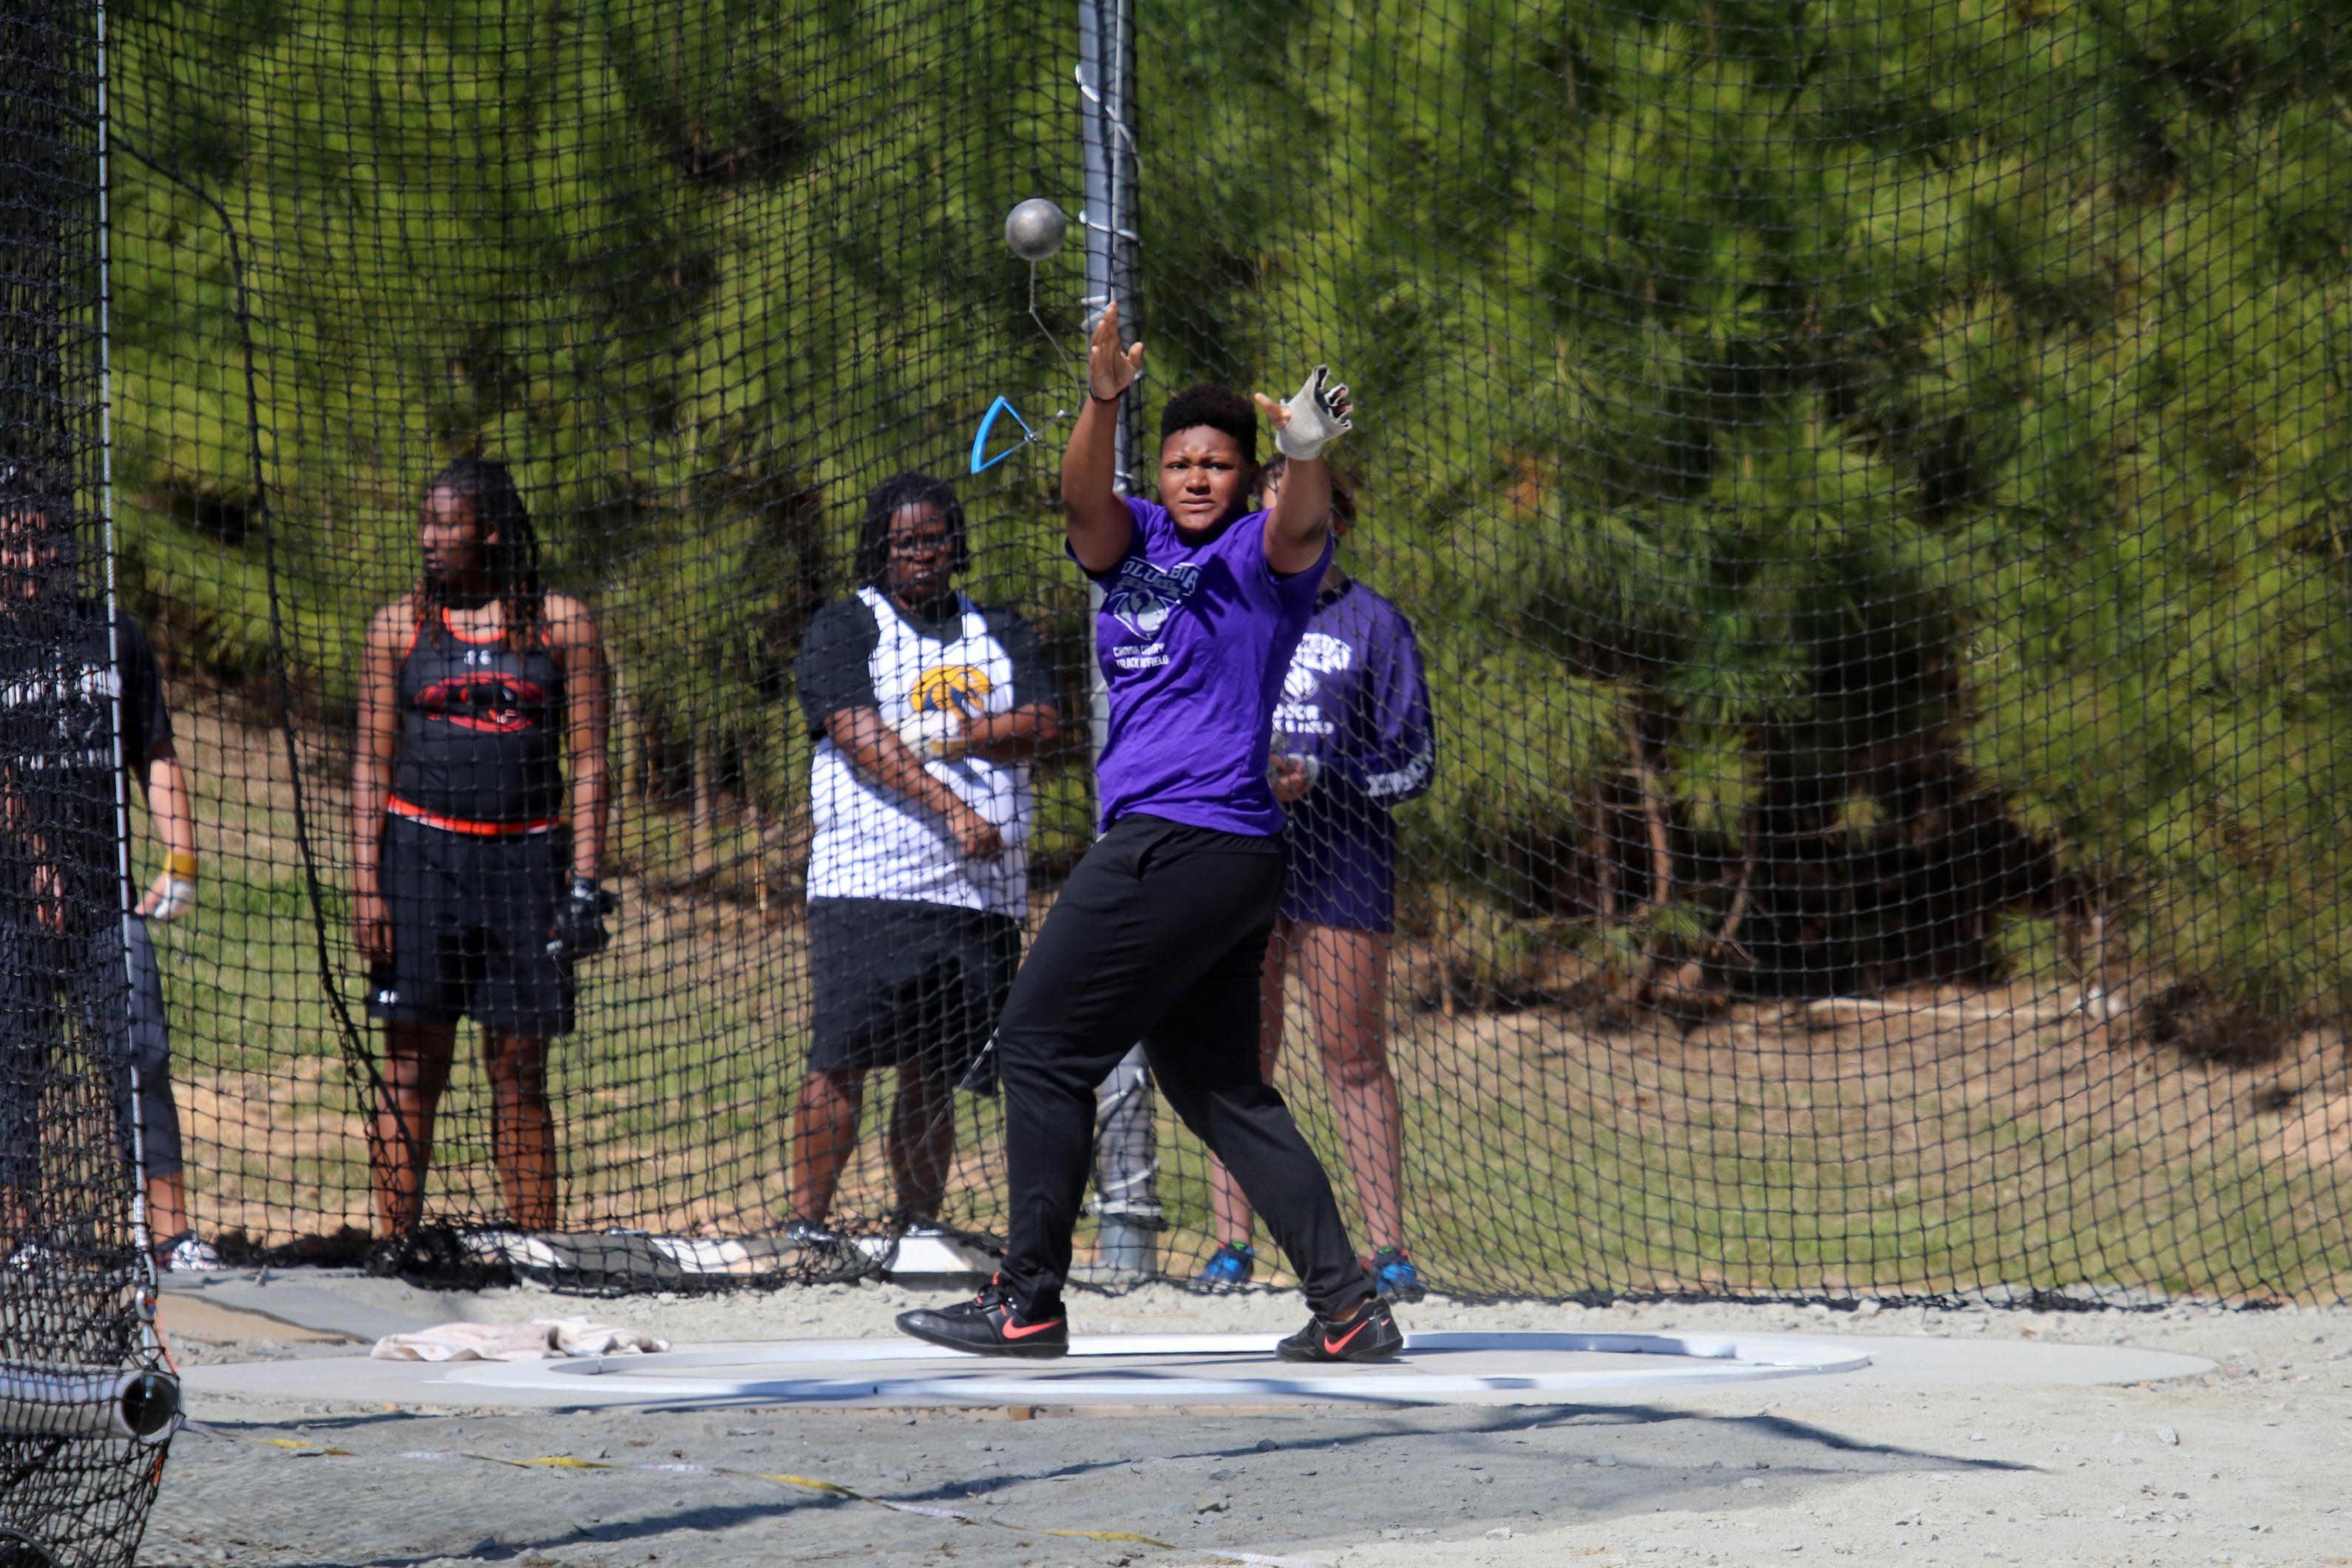 Throwers Lead the Way for Koalas